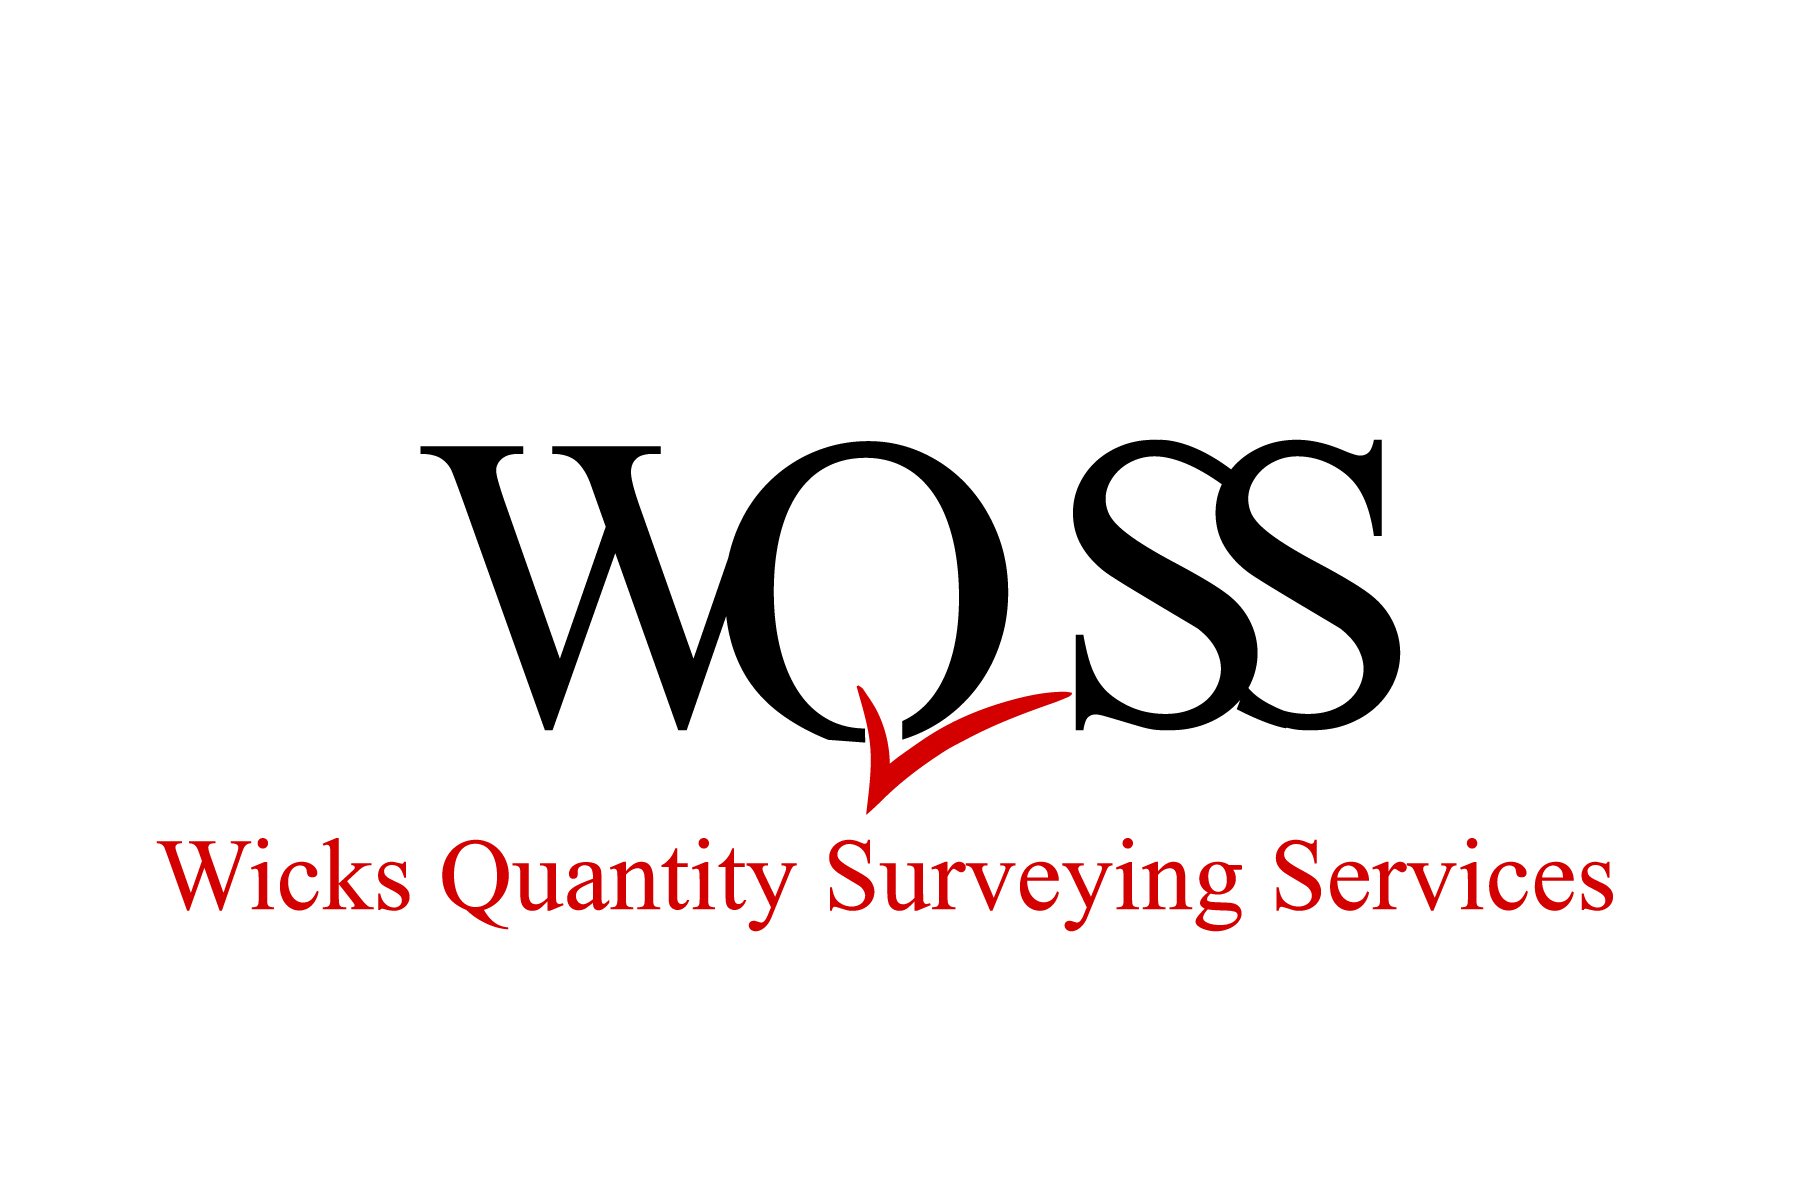 Freelance Quantity Surveying and Estimating Services for House Builds, Developers, Trades and More. Get in touch now to see how we can assist you. Thanks, LW